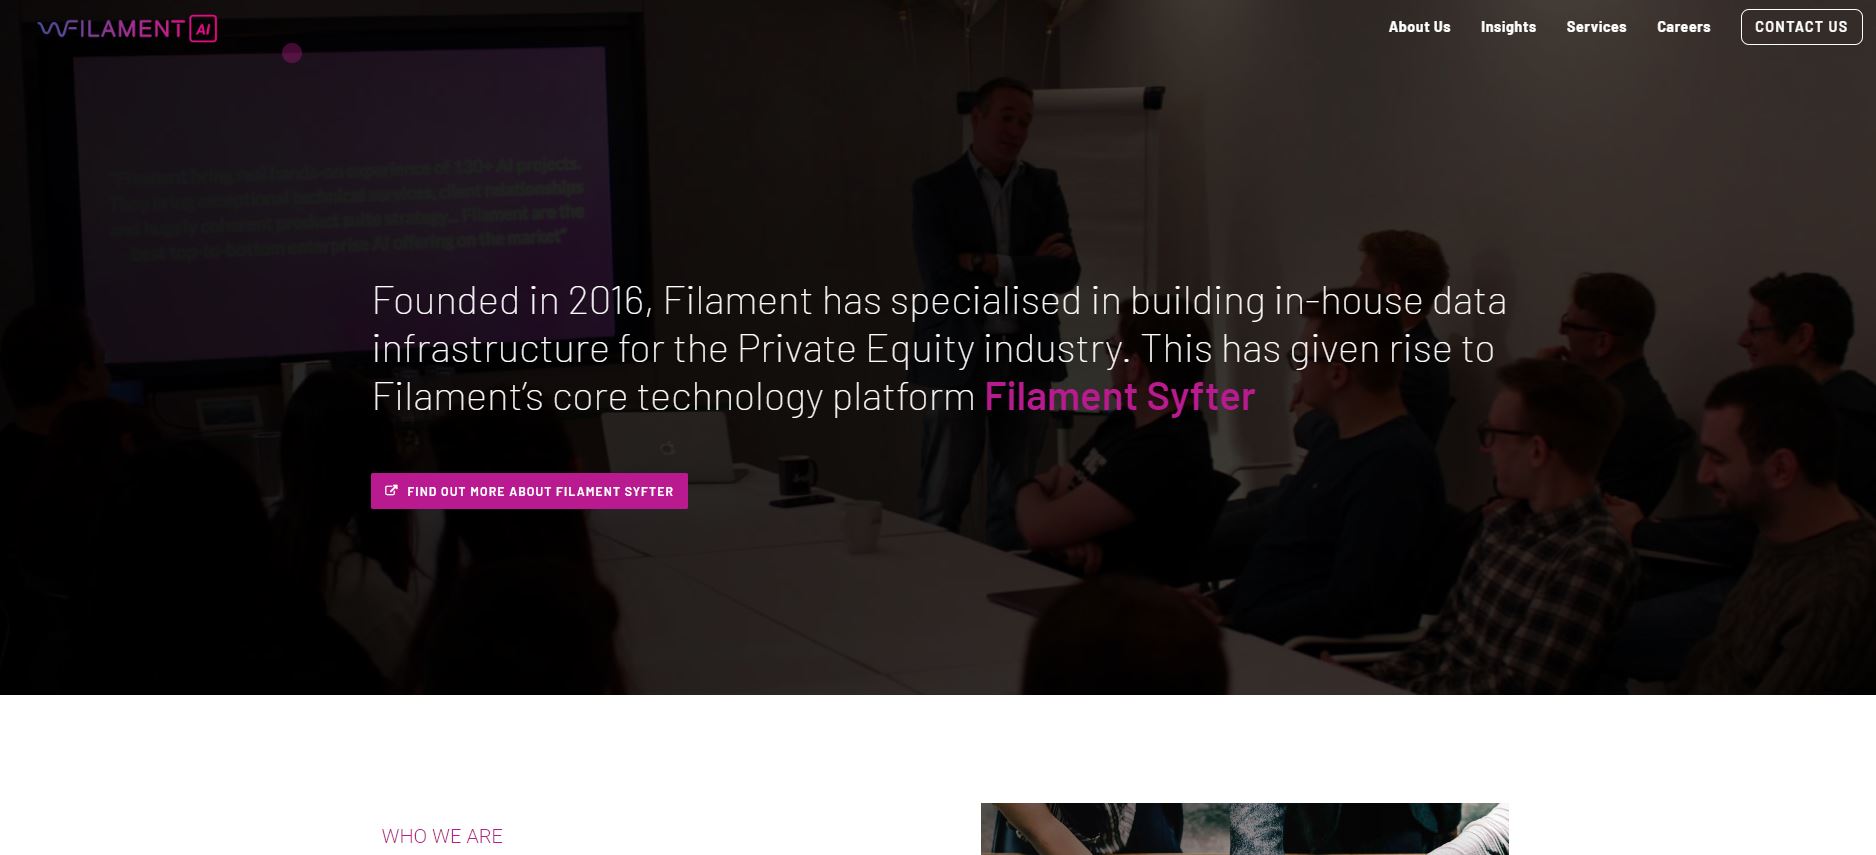 Filament AI recently raised a whopping $3.6 million and has Wealth Club as their investor